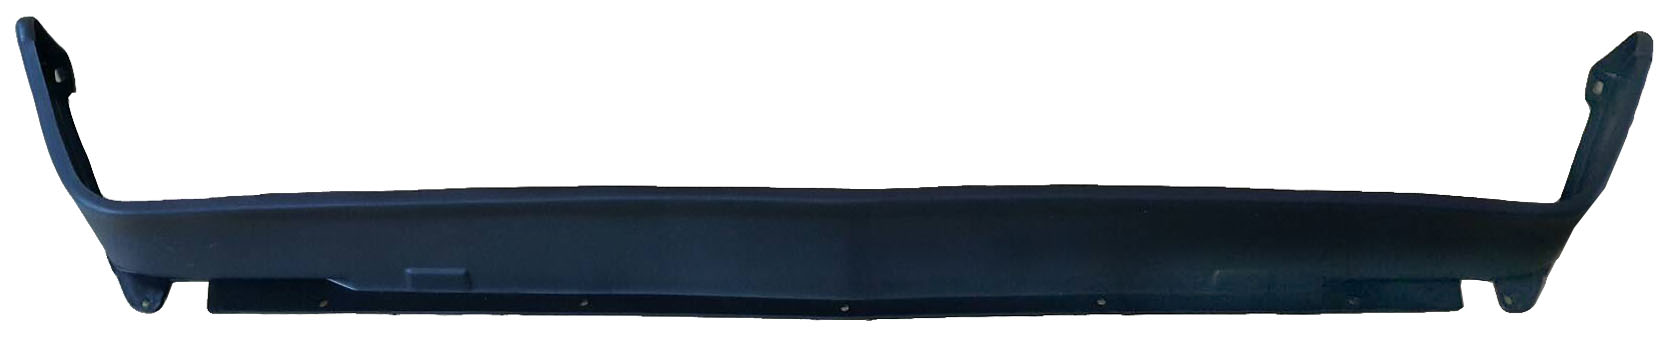 Aftermarket APRON/VALANCE/FILLER PLASTIC for GMC - S15 JIMMY, S15 JIMMY,83-91,Front bumper air dam